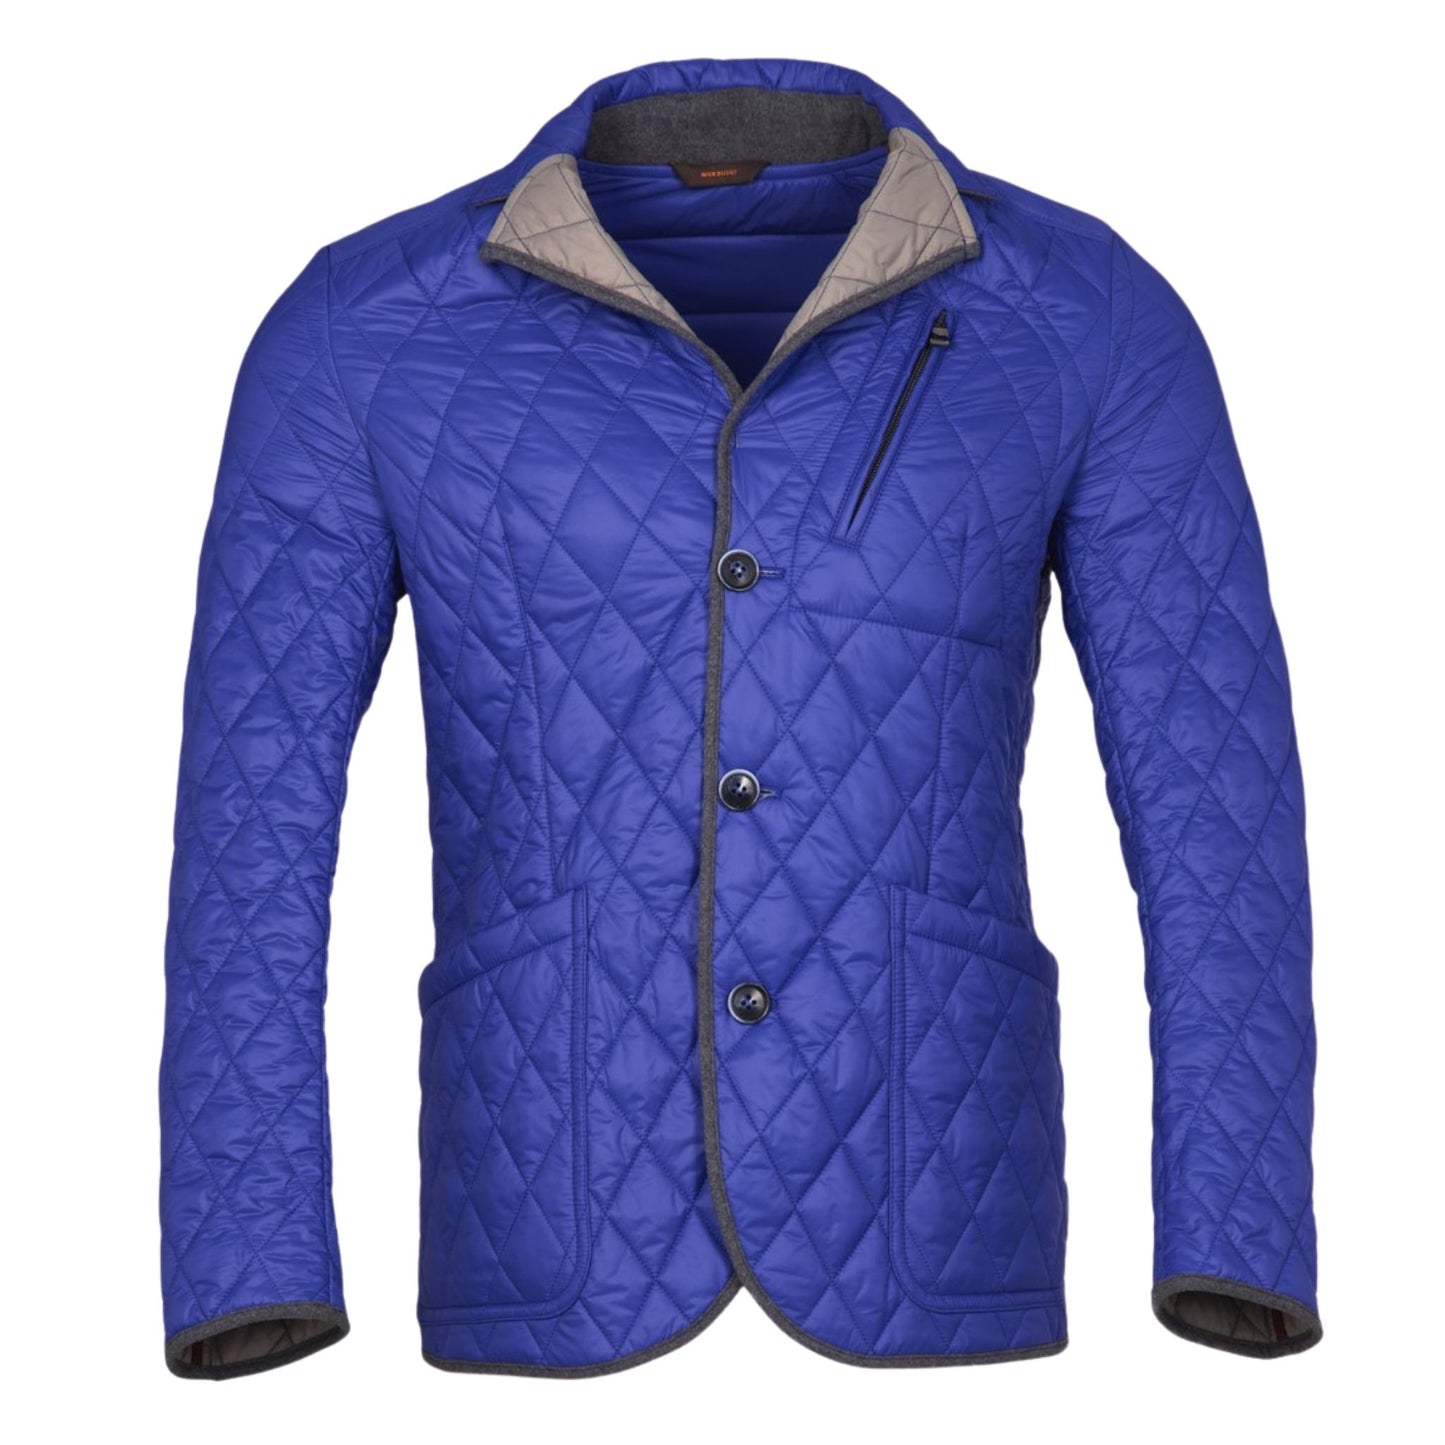 Jon Quilted Jacket